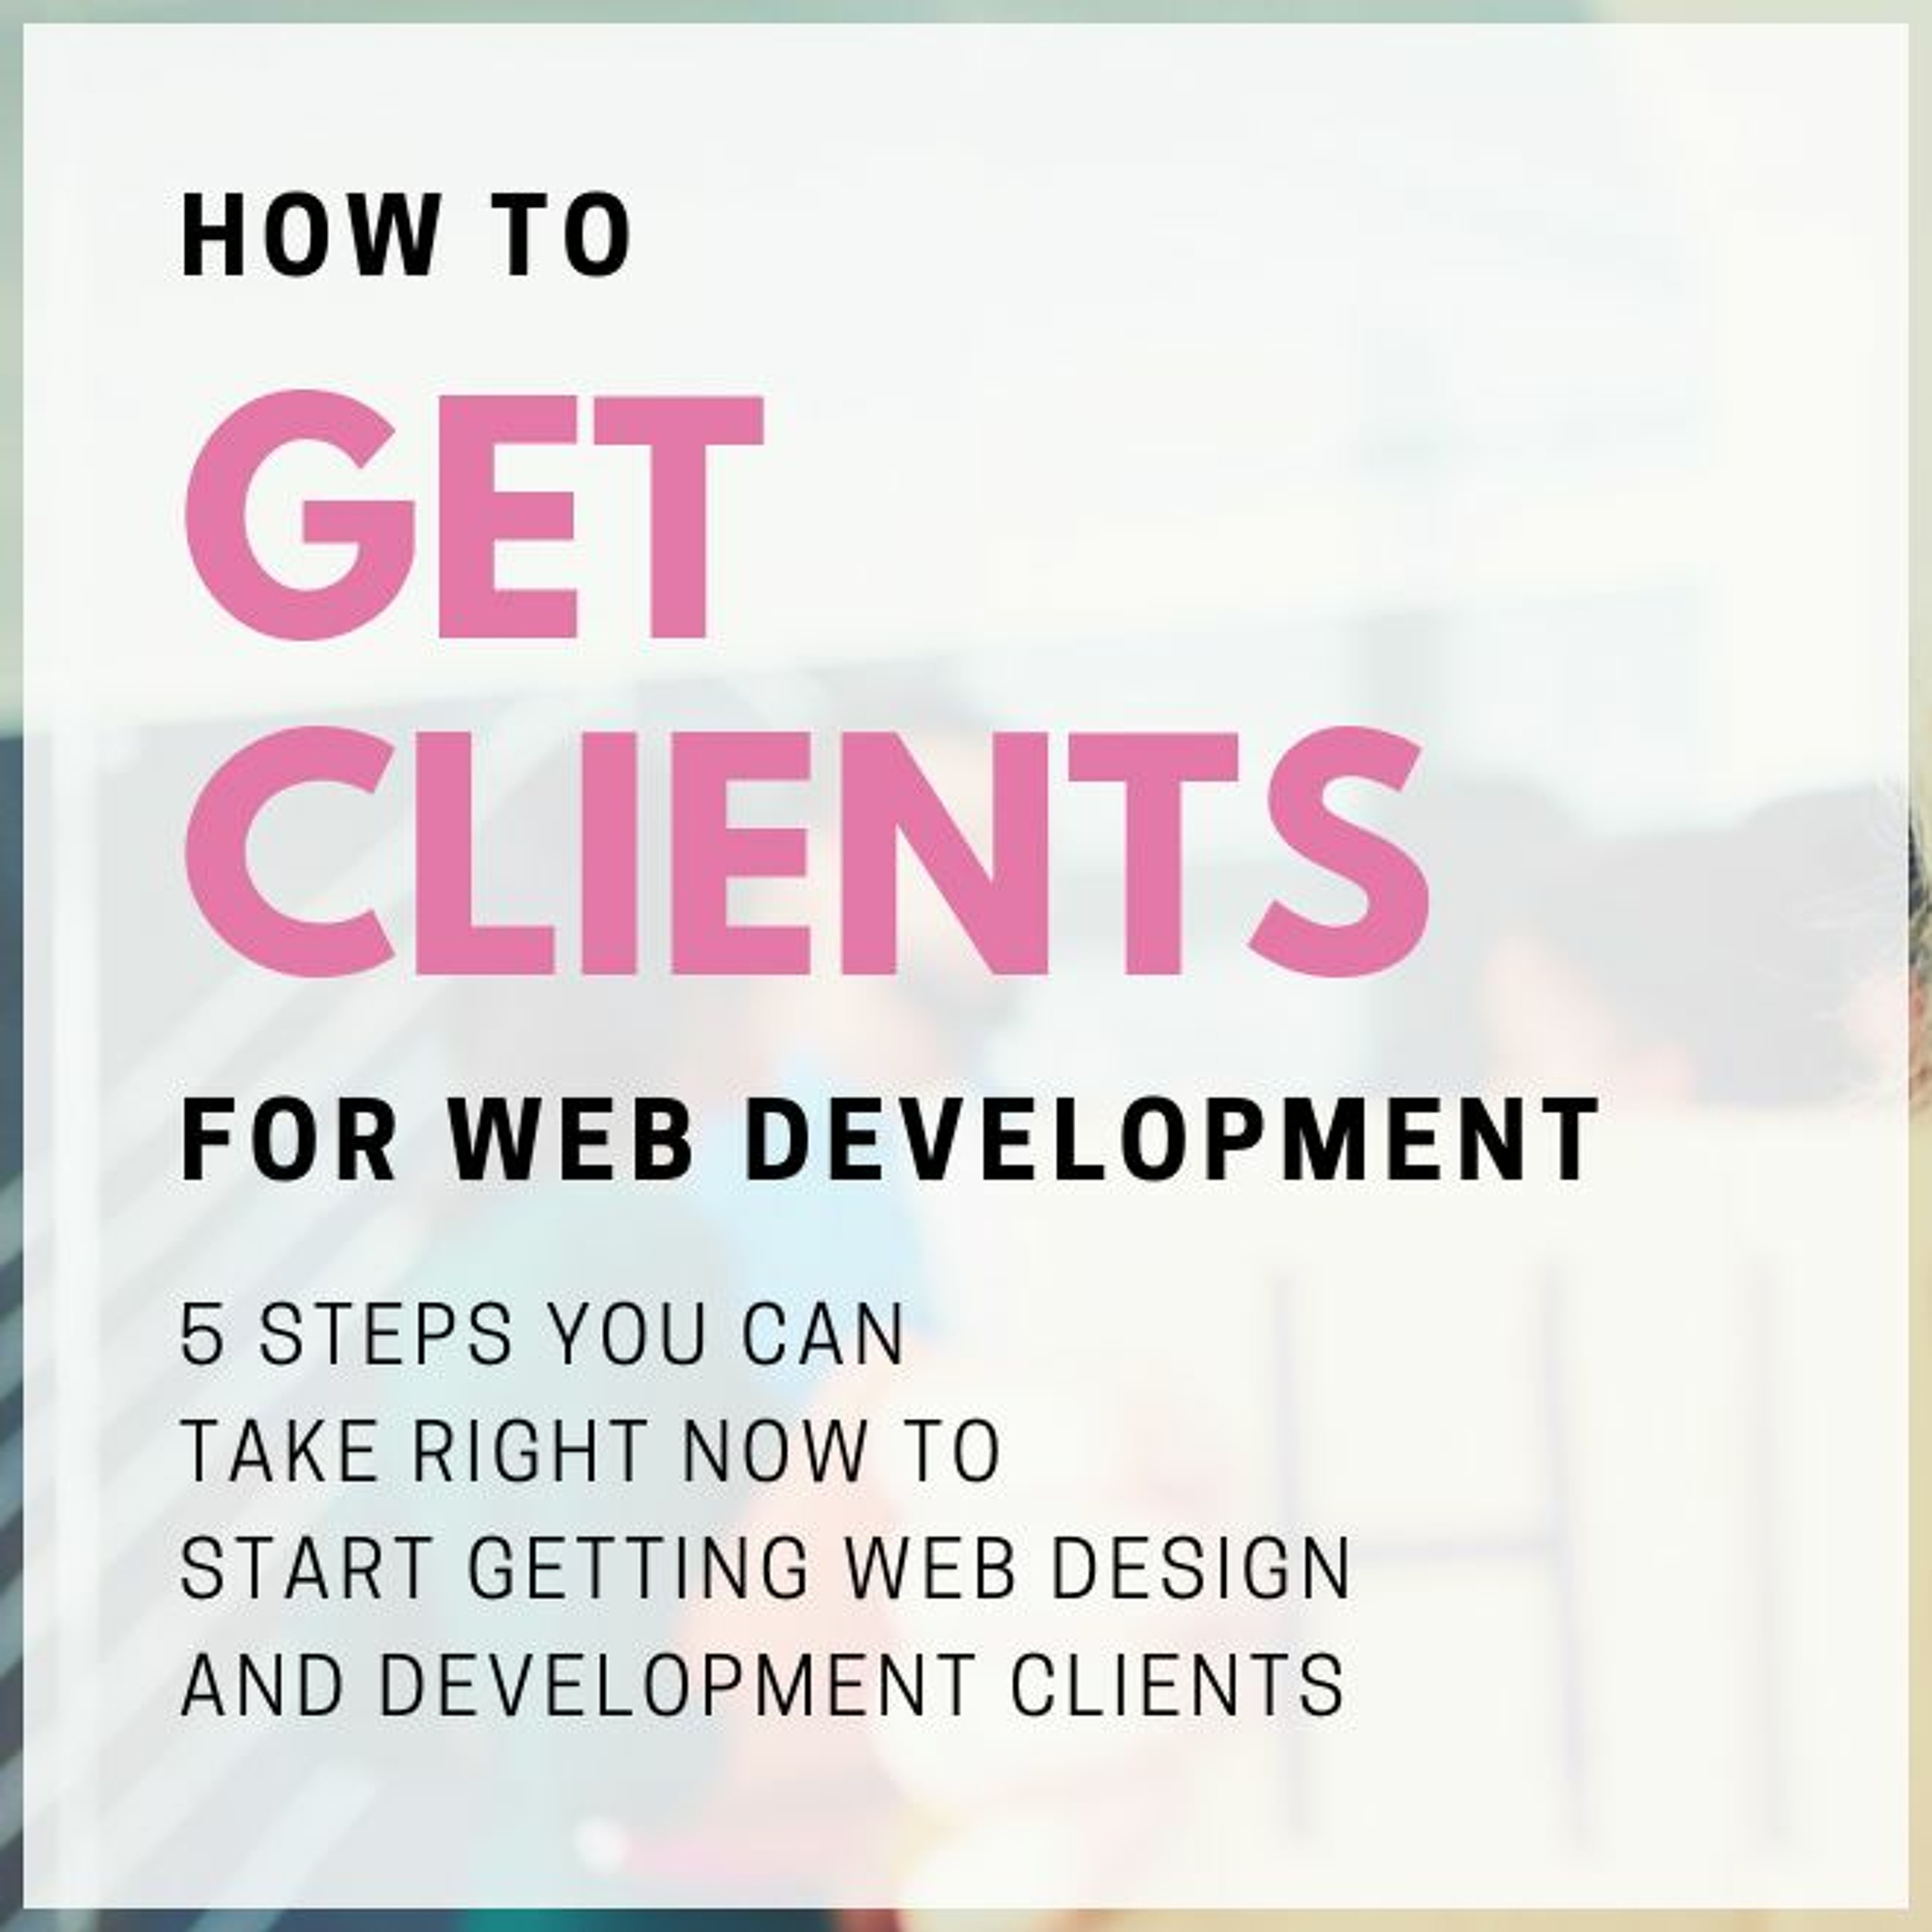 How to get clients for web development